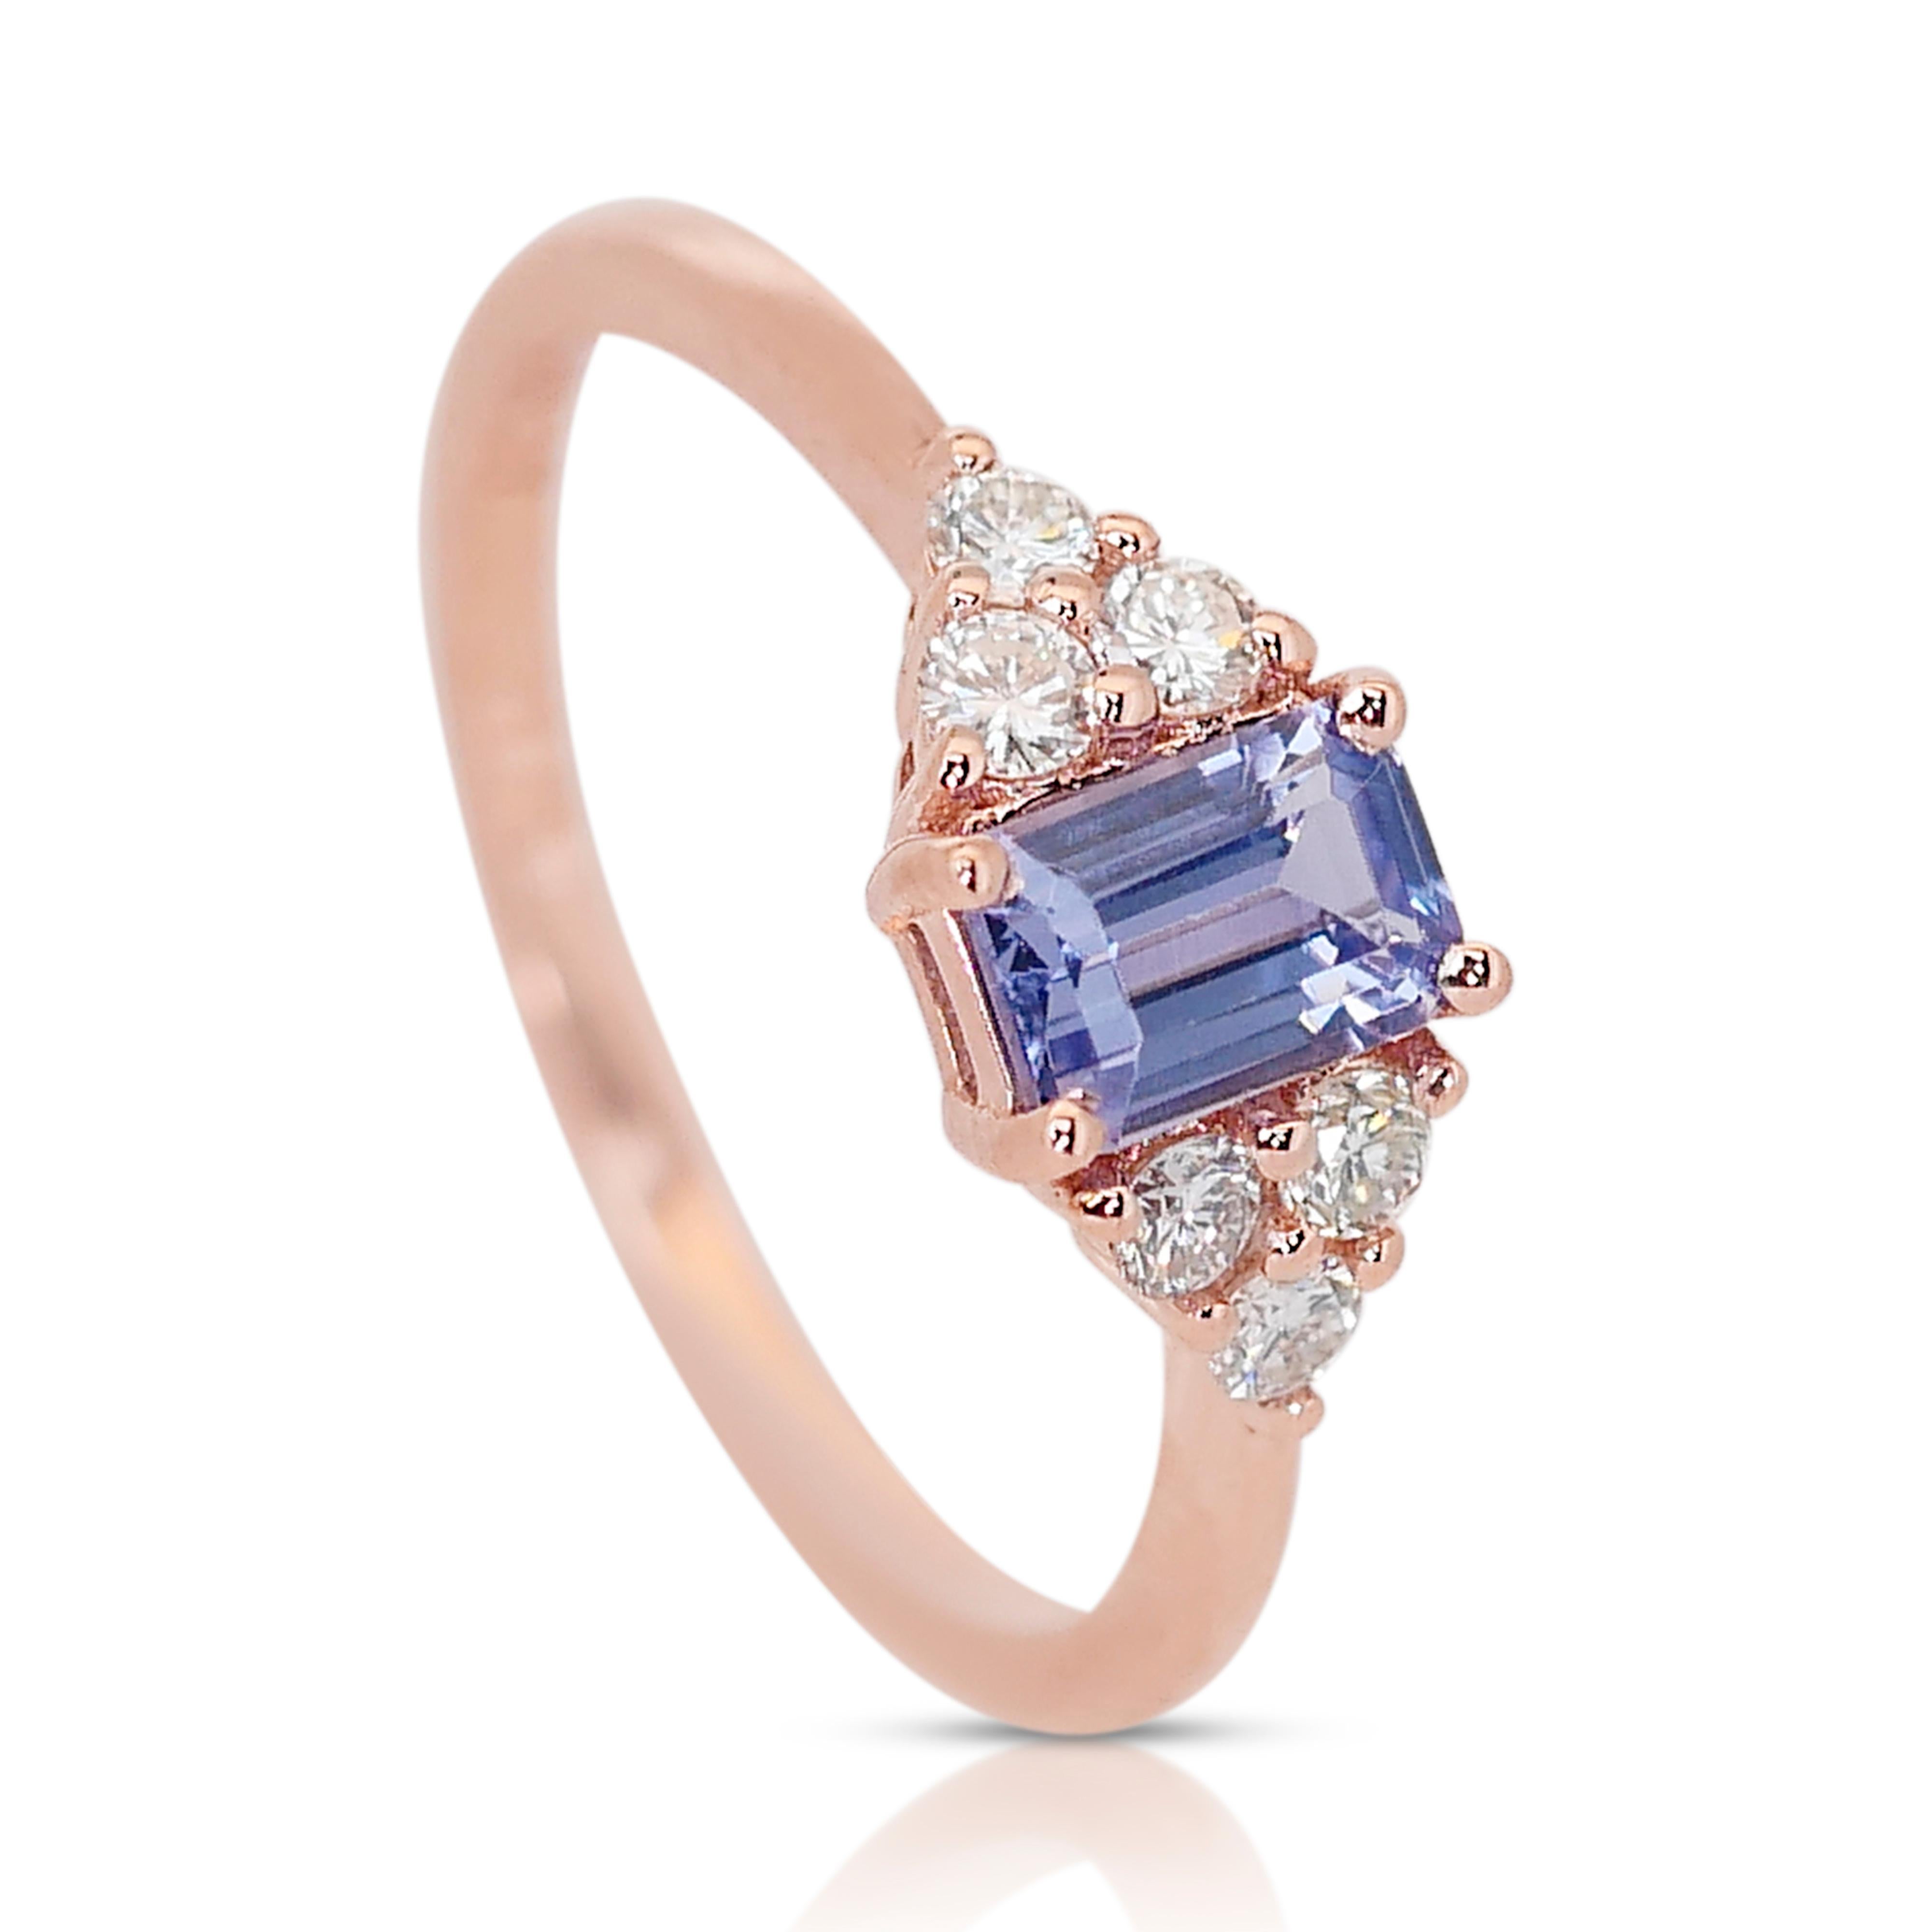 Captivating 1.14 ct Tanzanite and Diamond Pave Ring in 14k Rose Gold - IGI  For Sale 4